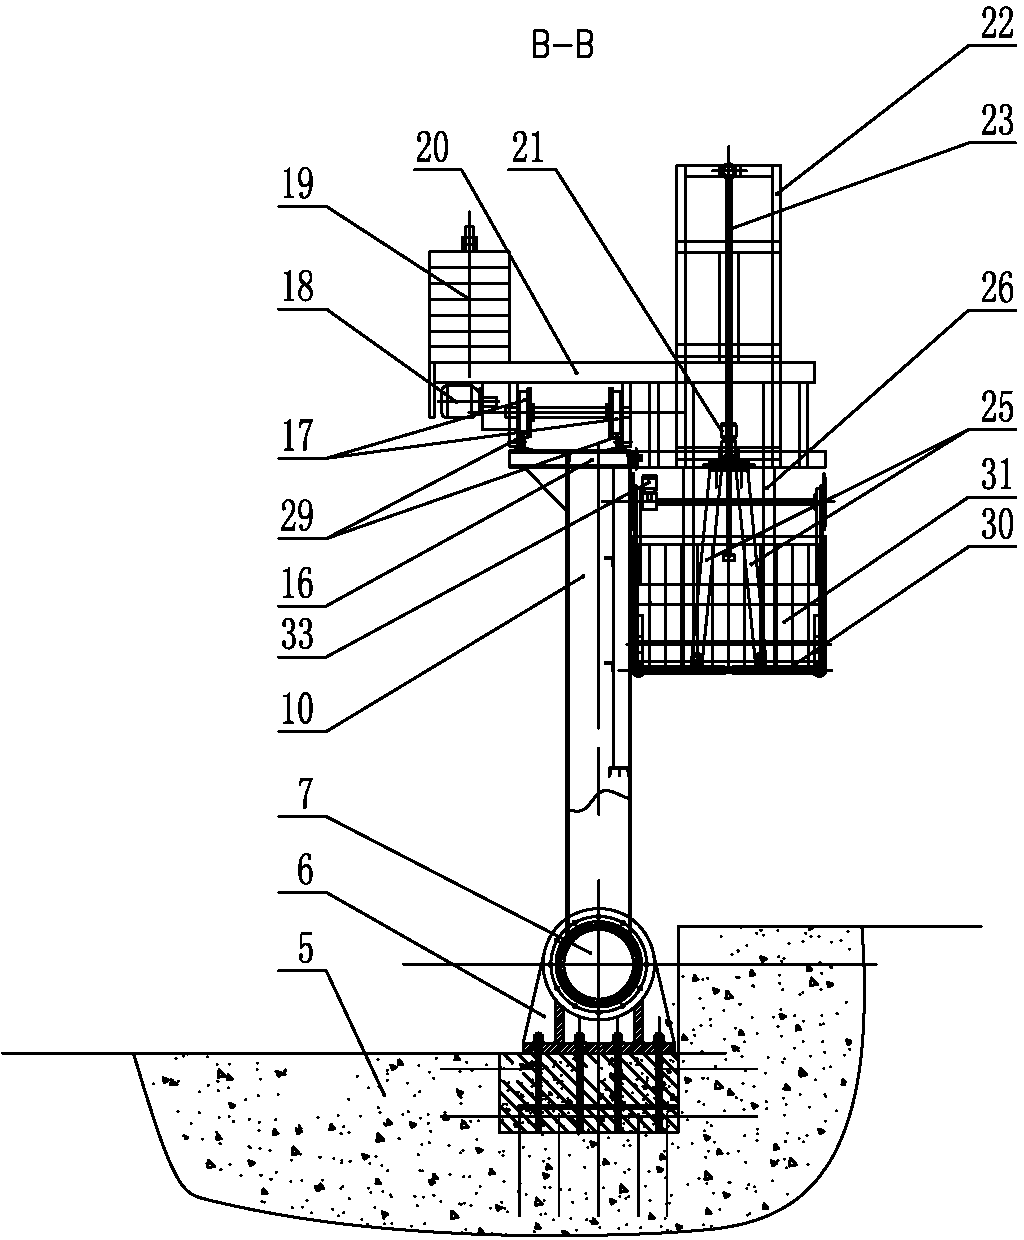 Sewage stopping and cleaning device